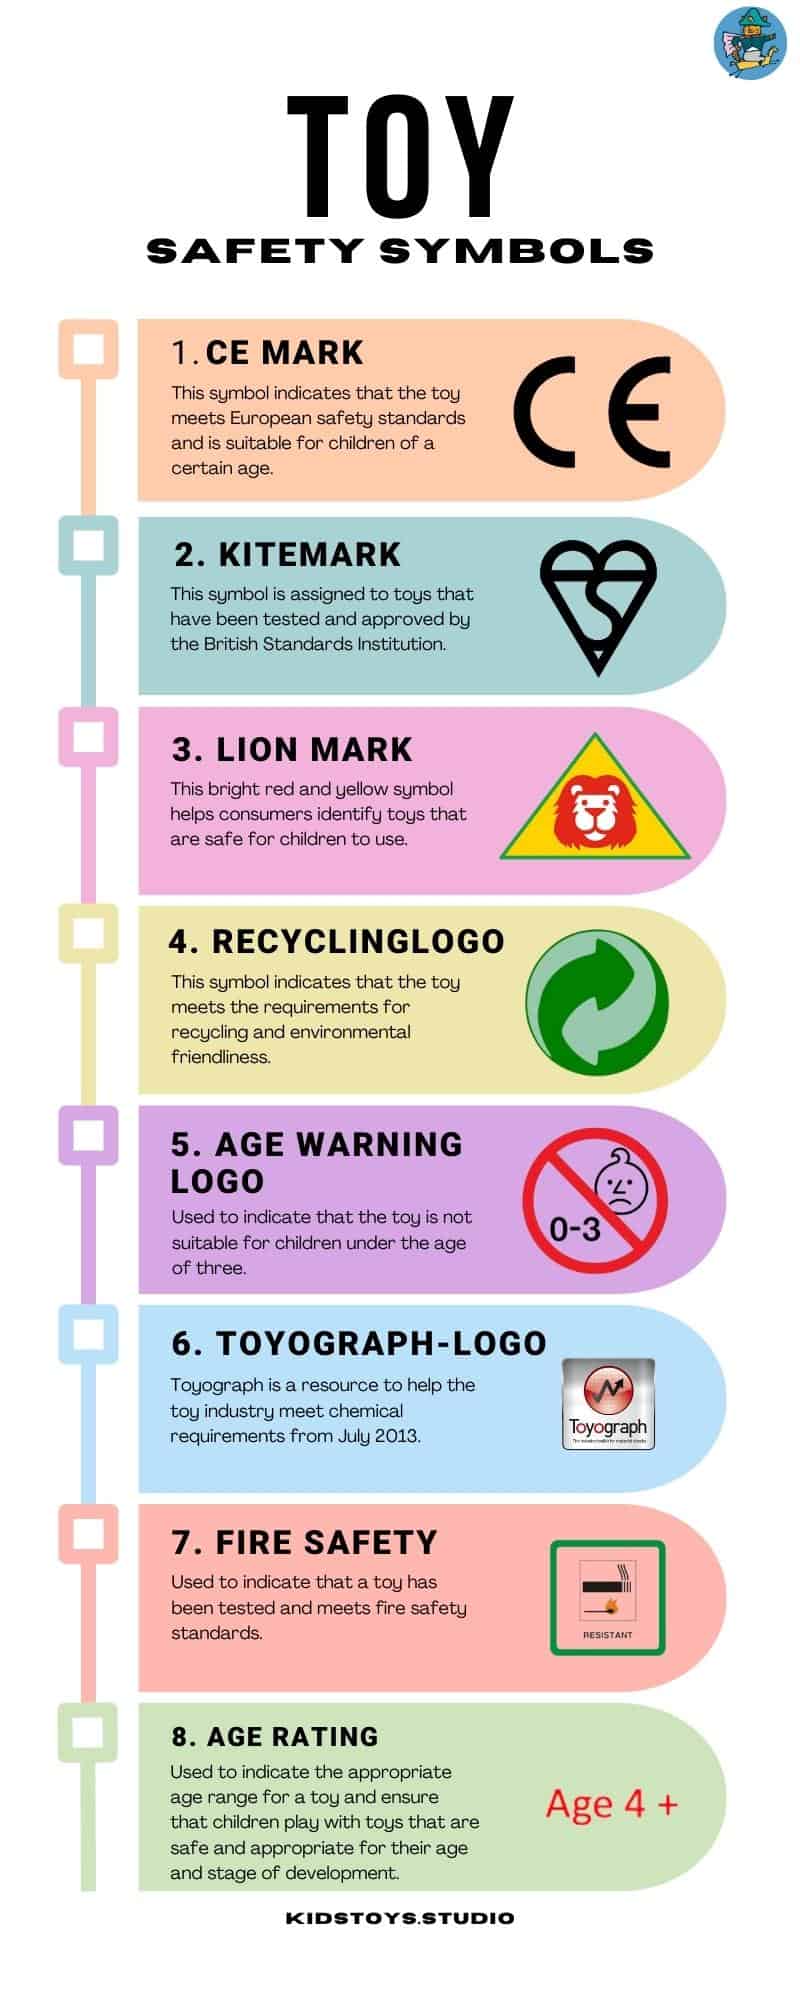 List of the most important toy safety symbols